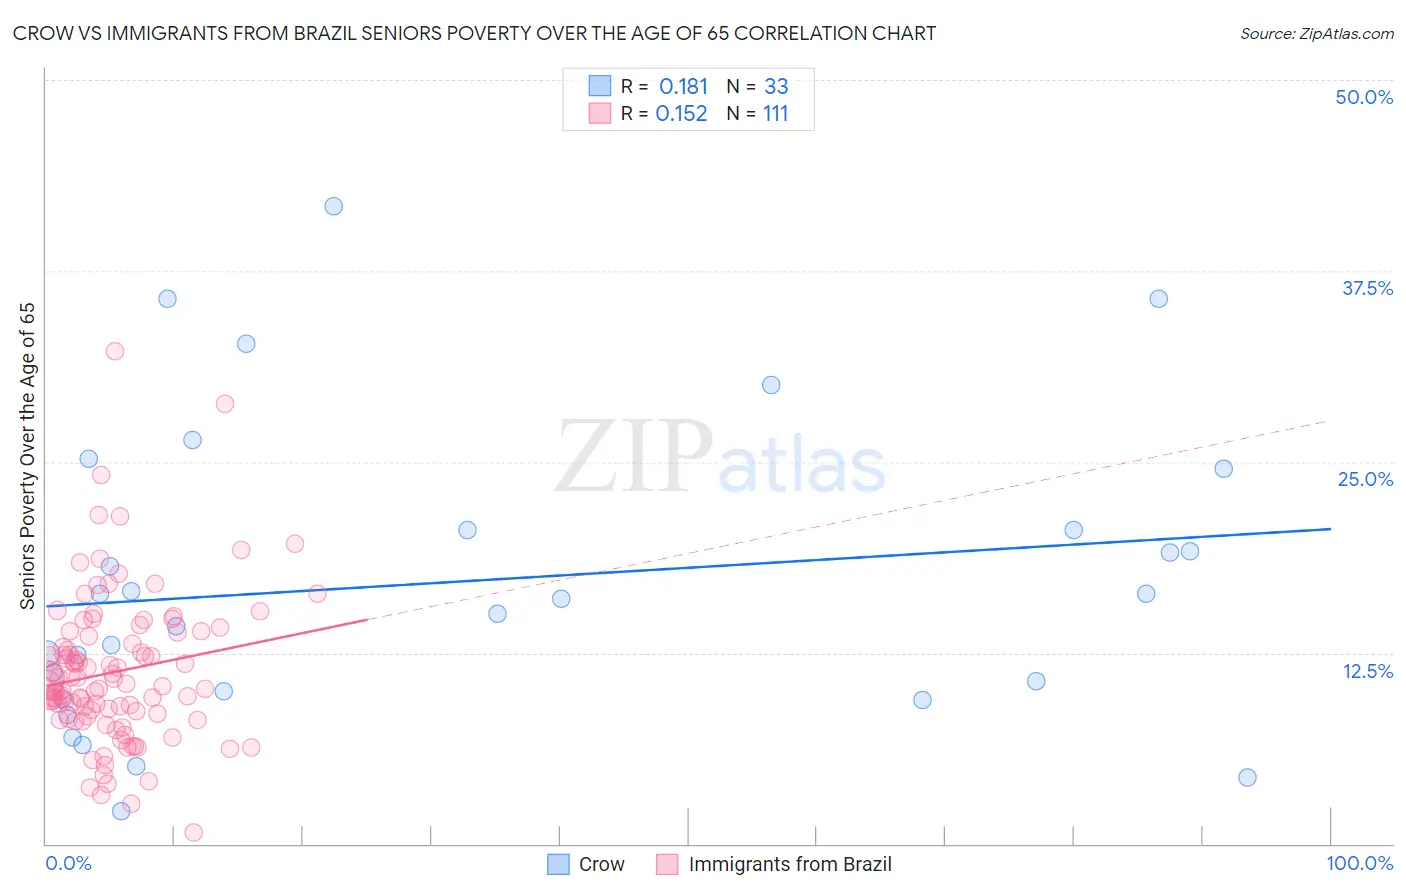 Crow vs Immigrants from Brazil Seniors Poverty Over the Age of 65